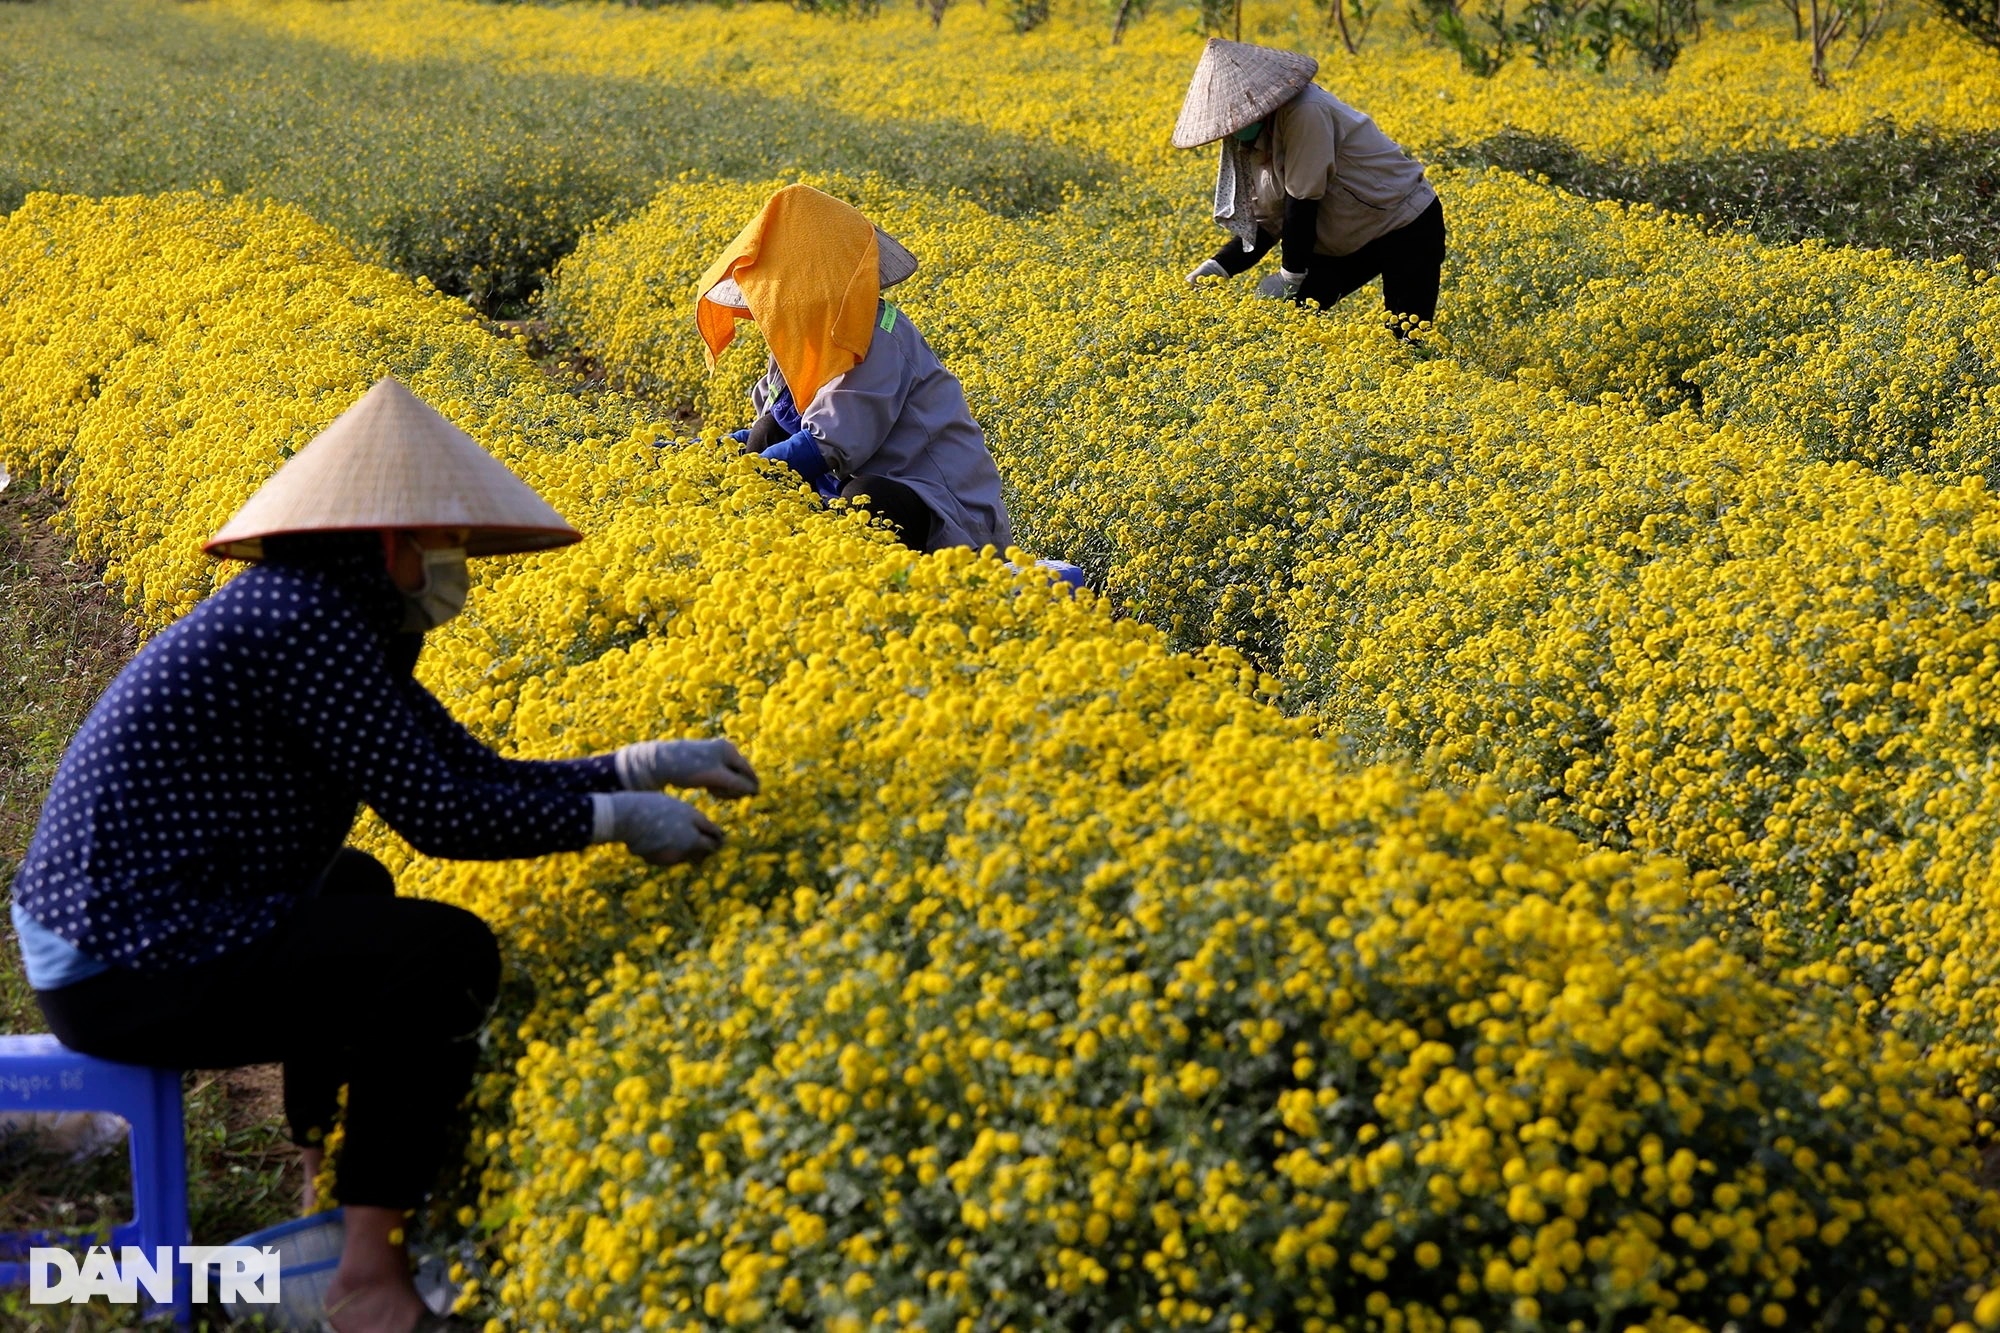 The last season of chrysanthemums is bright yellow in Nghia Trai field - 3